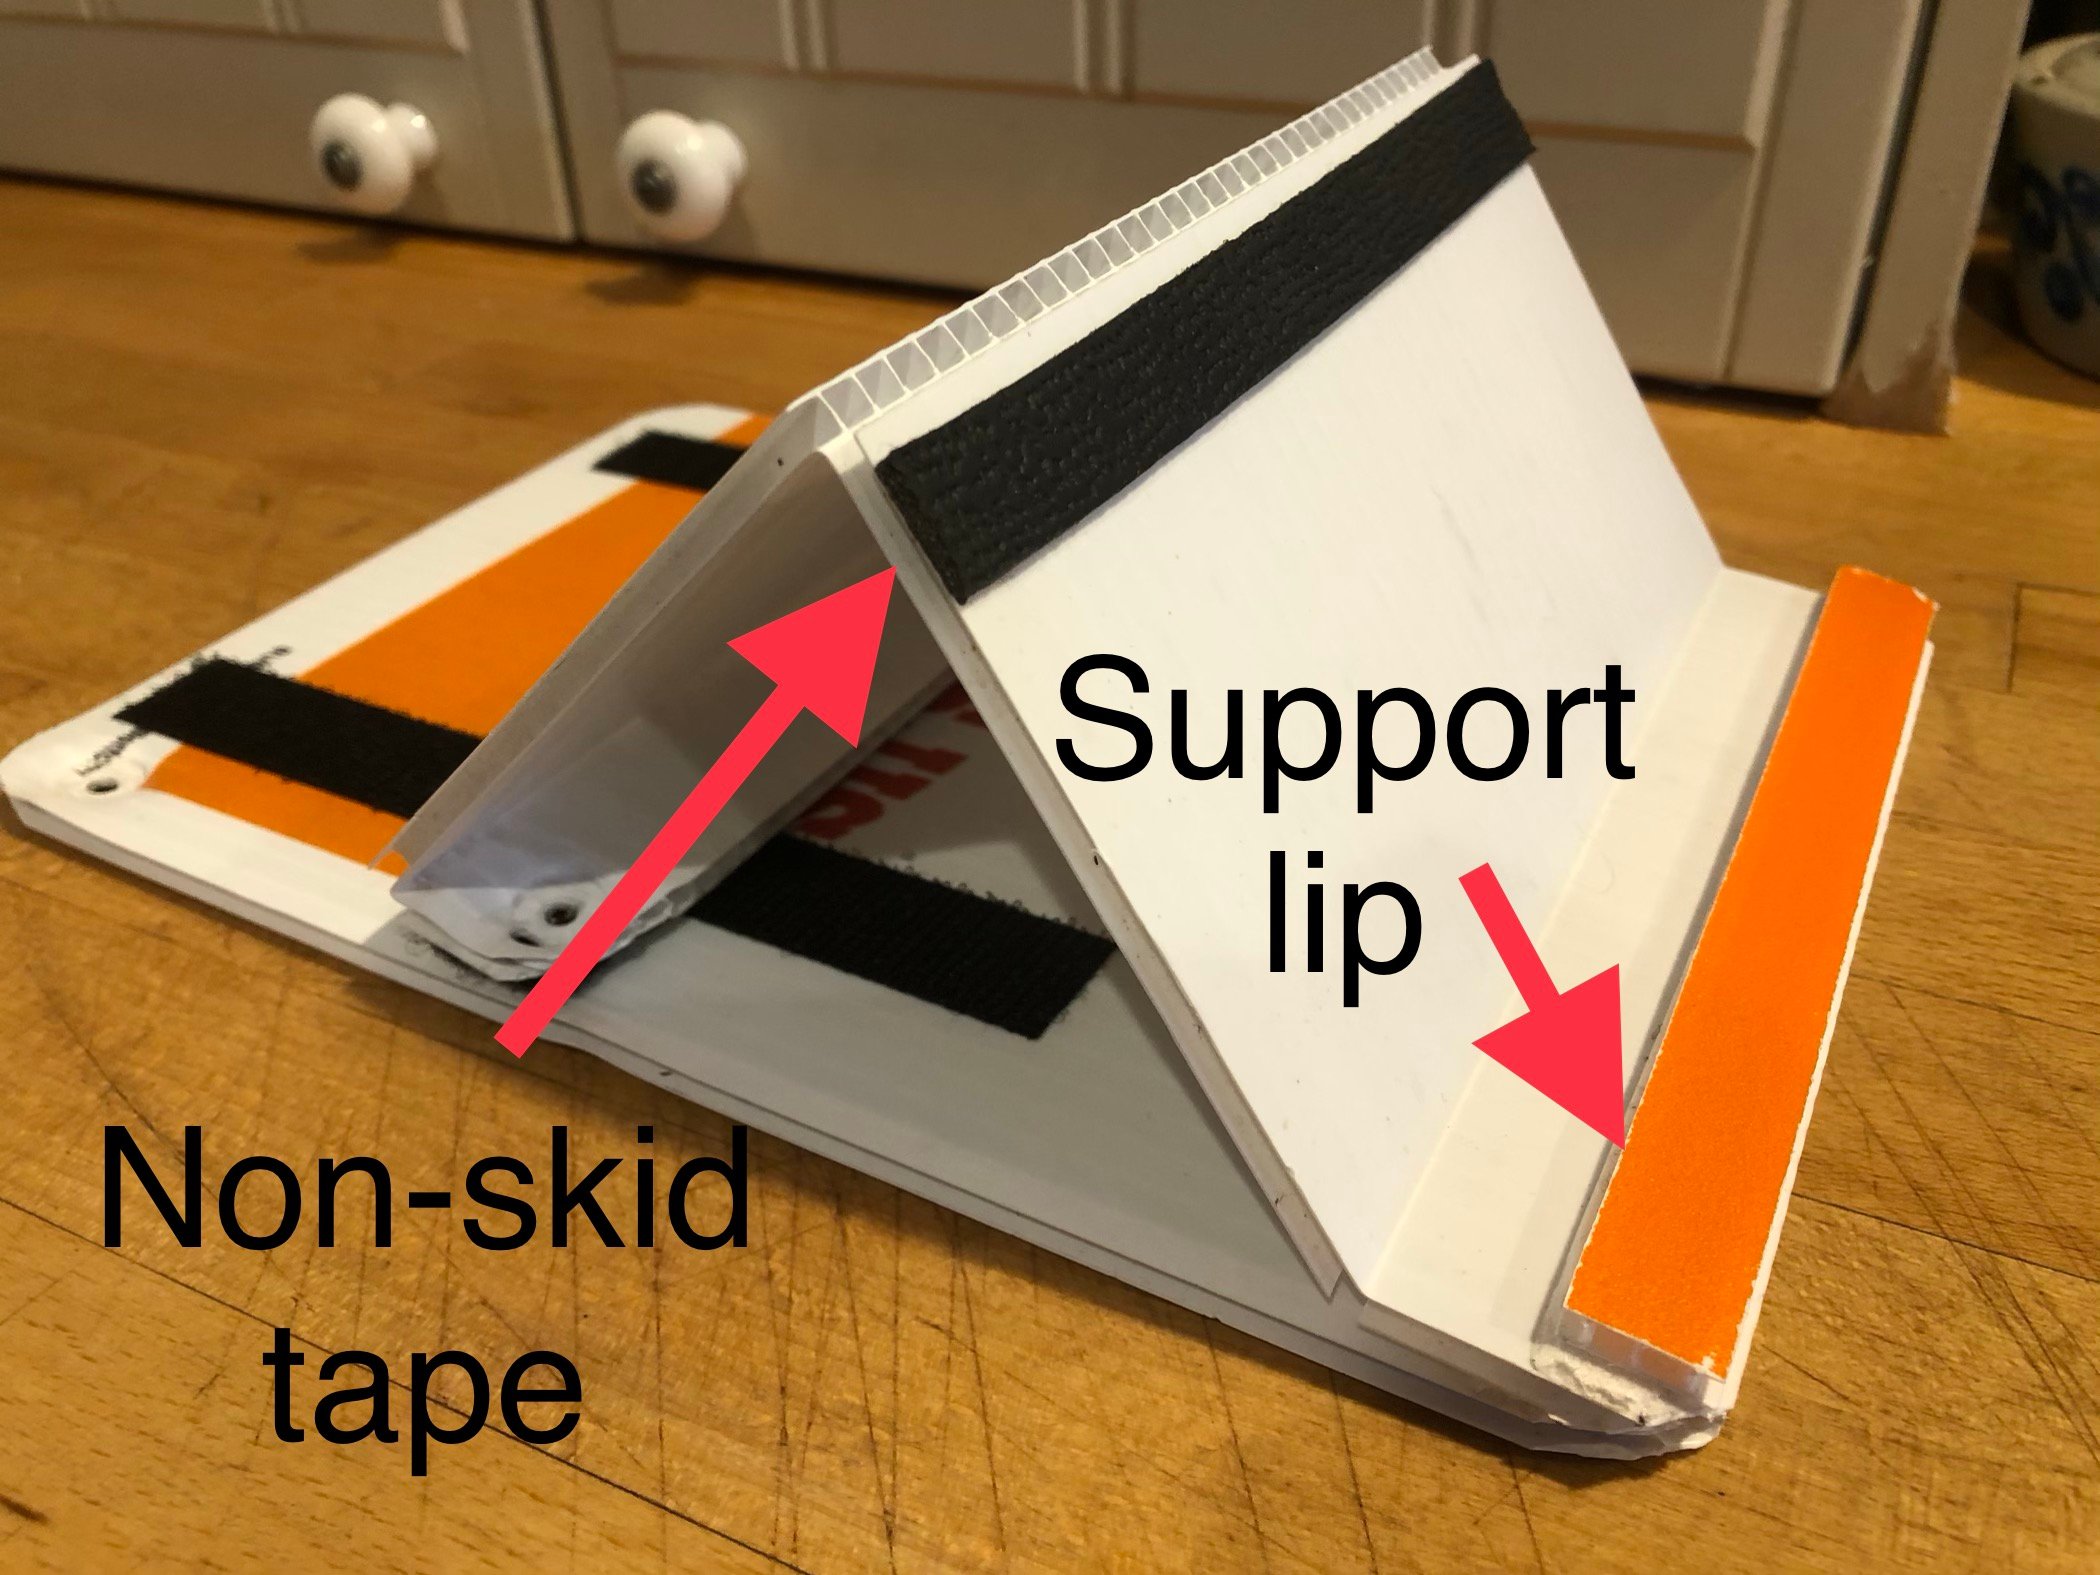 Corrugated plastic iPad stand with non-skid tape and support lip labeled.